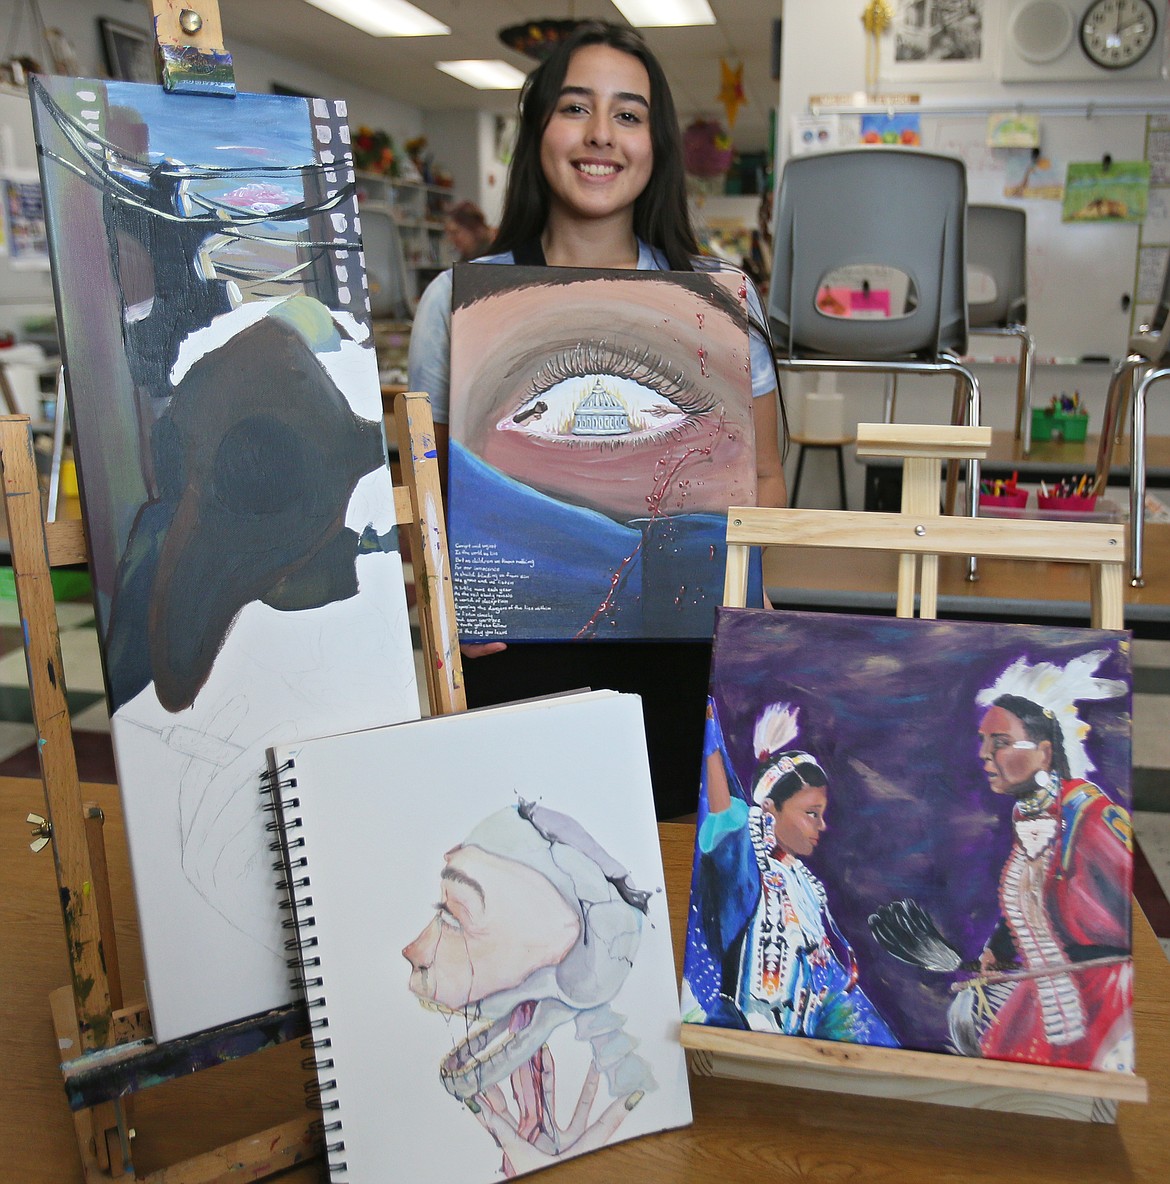 Junior Isabella Moreno shows off her eclectic assortment of talent April 14 in Michele Chmielewski's class at Post Falls High School.